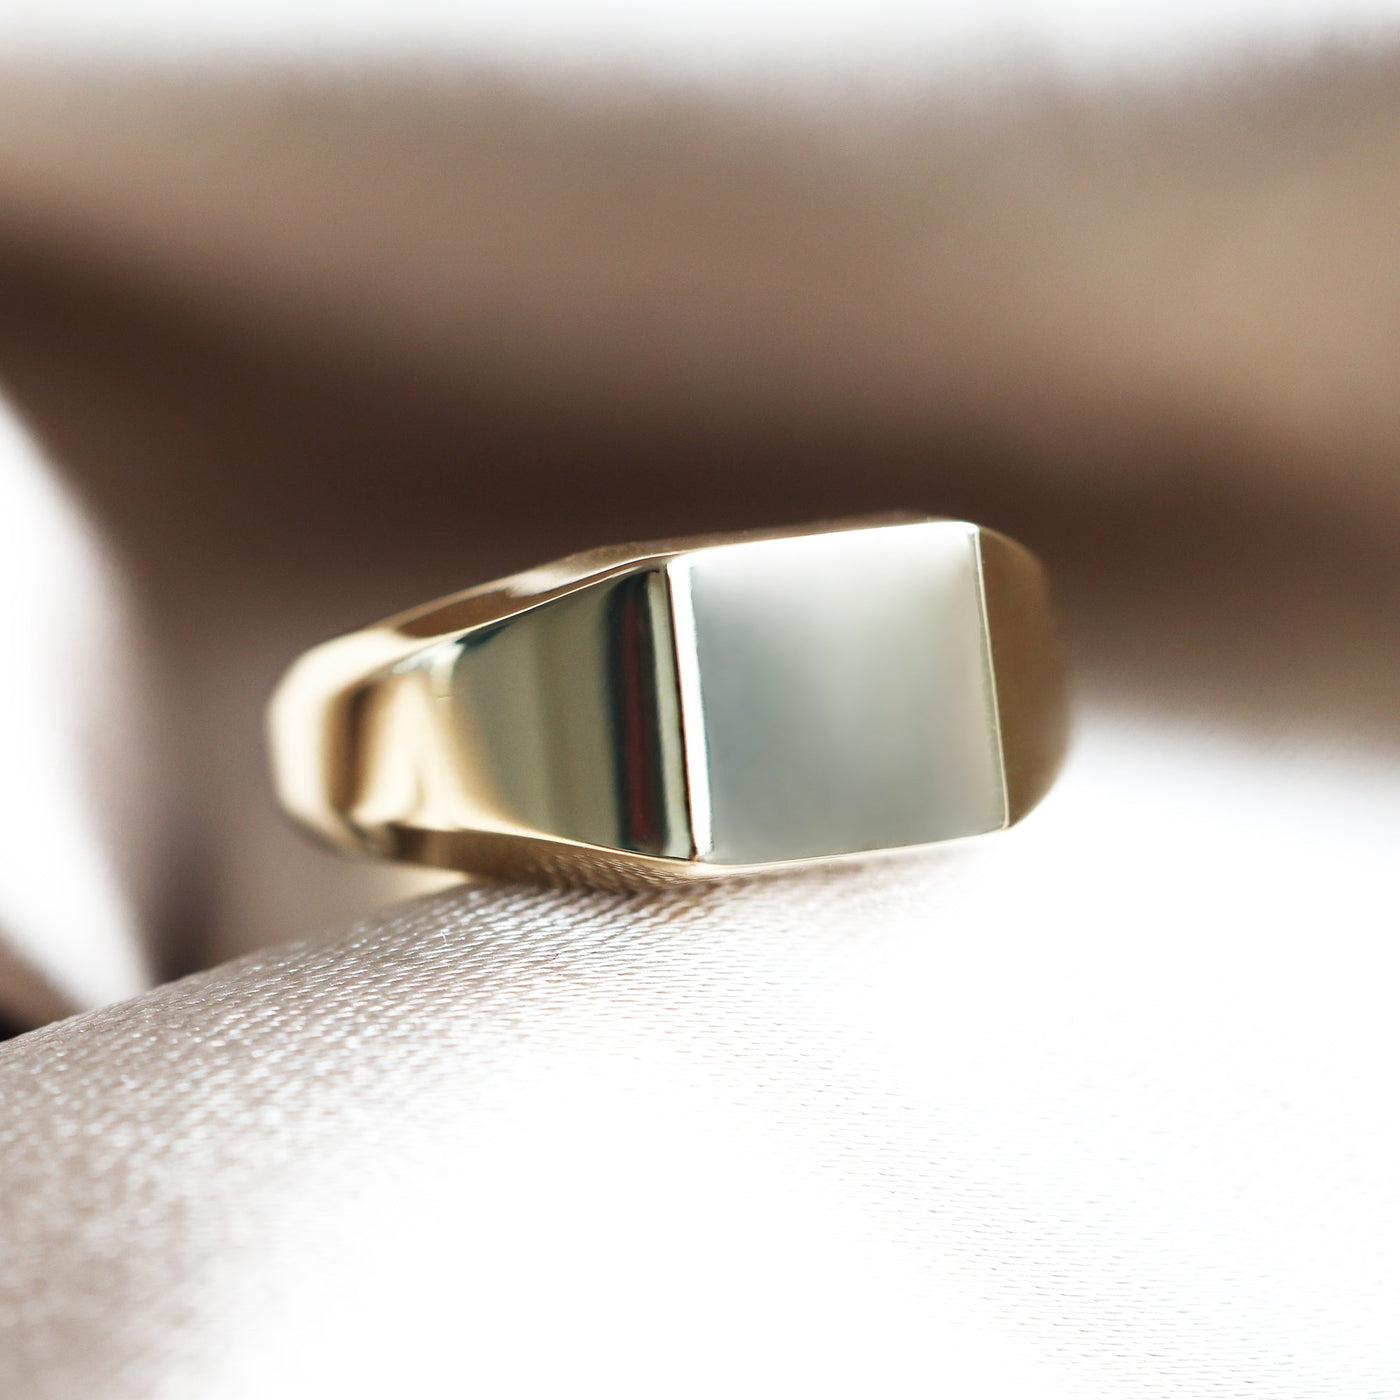 Gold signet ring with plain style, 9.3mm front width, and polished finish. Customizable with gemstones. Made from premium metals like sterling silver, gold, and platinum.